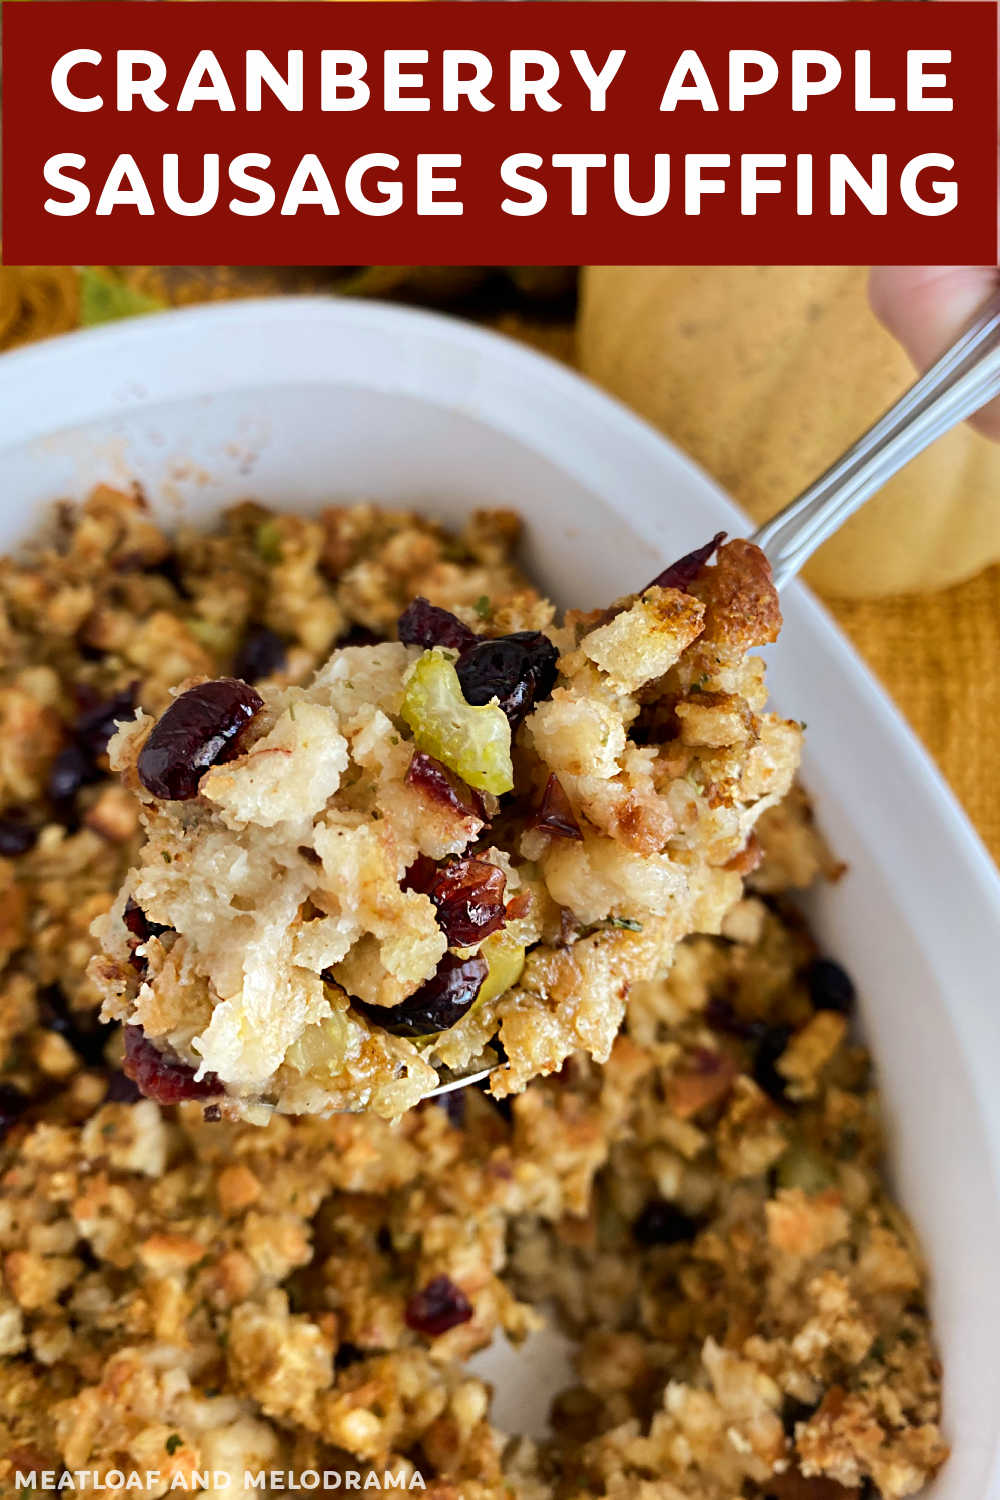 Cranberry Apple Sausage Stuffing is a delicious stuffing recipe with sourdough bread, tart apples, dried cranberries and savory sausage. This Thanksgiving stuffing recipe is the perfect addition to your holiday meal! via @meamel